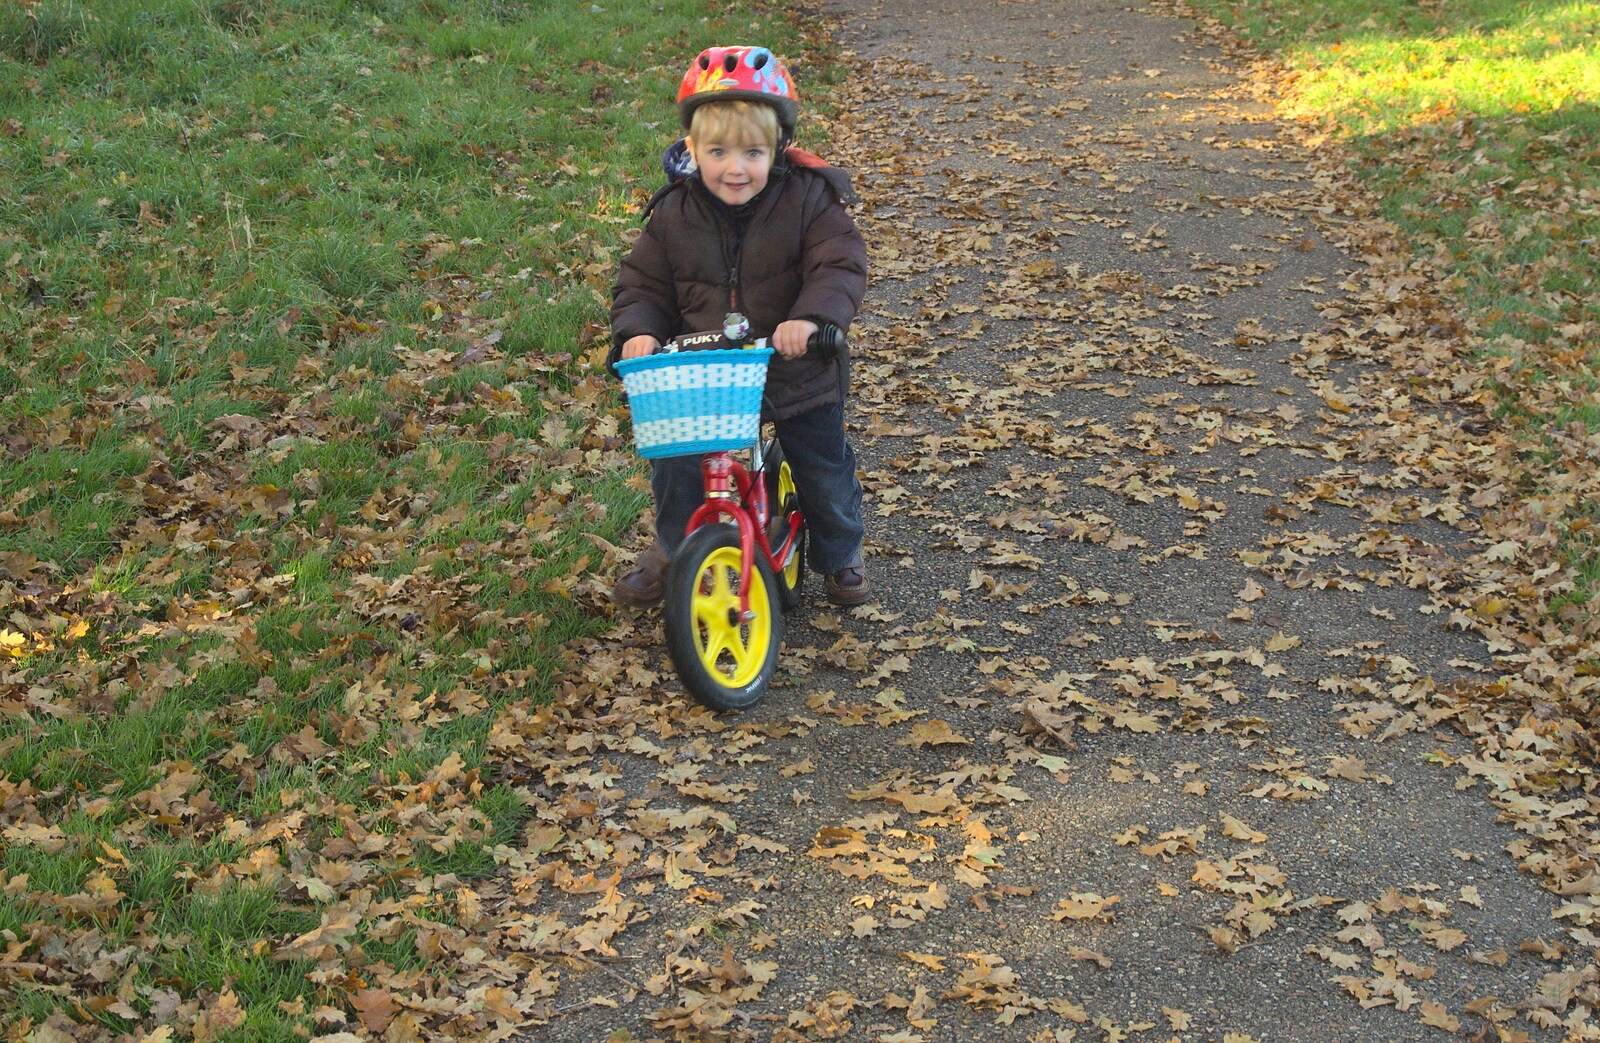 Over in Thornham, Fred's on his balance bike from A Busy Day, Southwold and Thornham, Suffolk - 11th November 2012